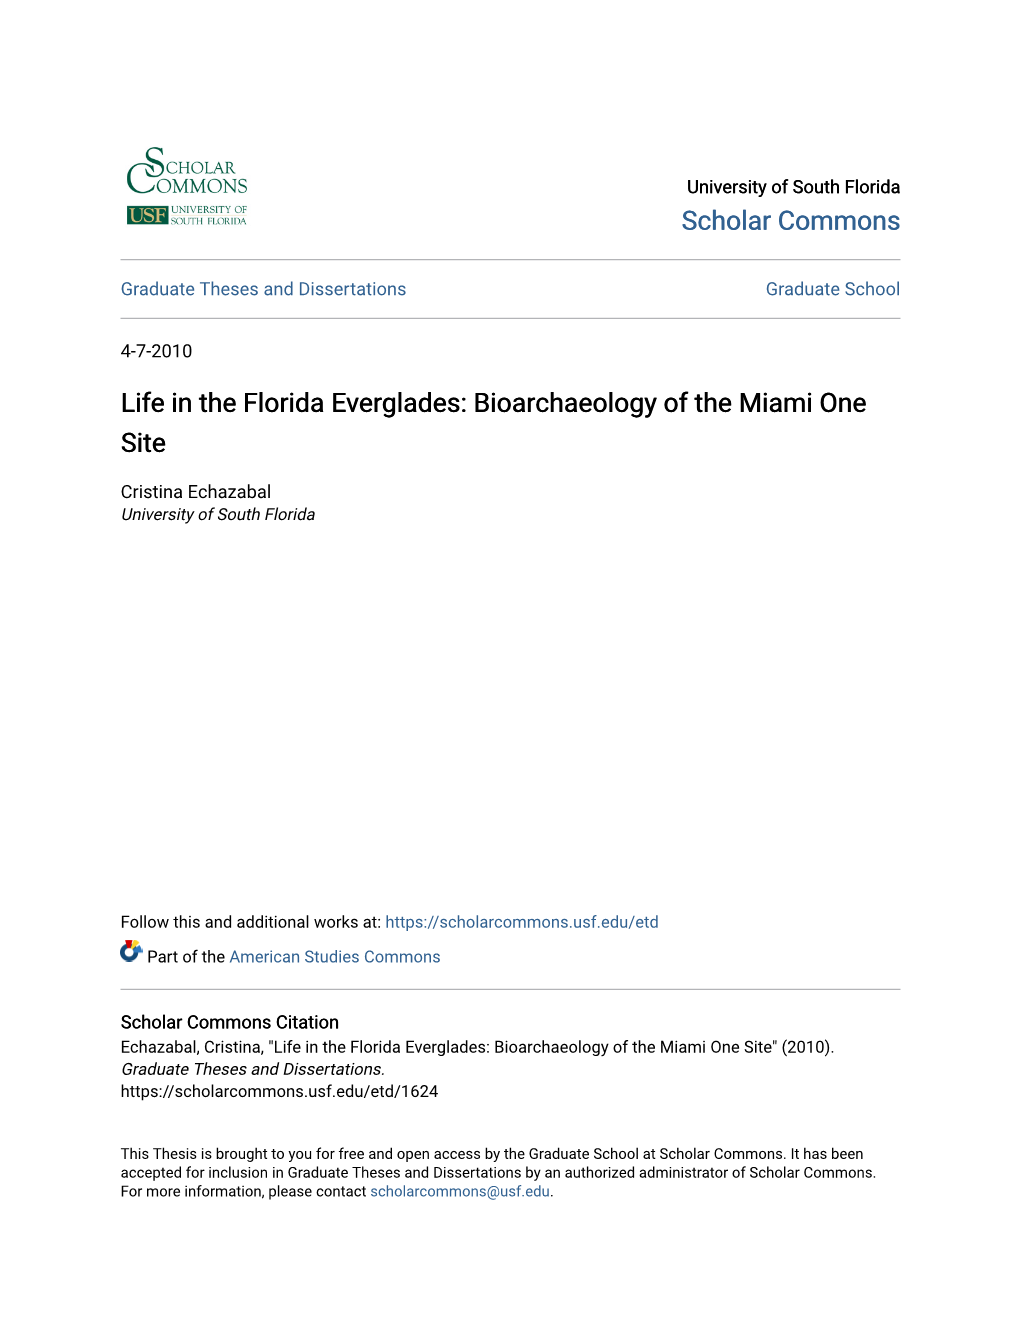 Life in the Florida Everglades: Bioarchaeology of the Miami One Site